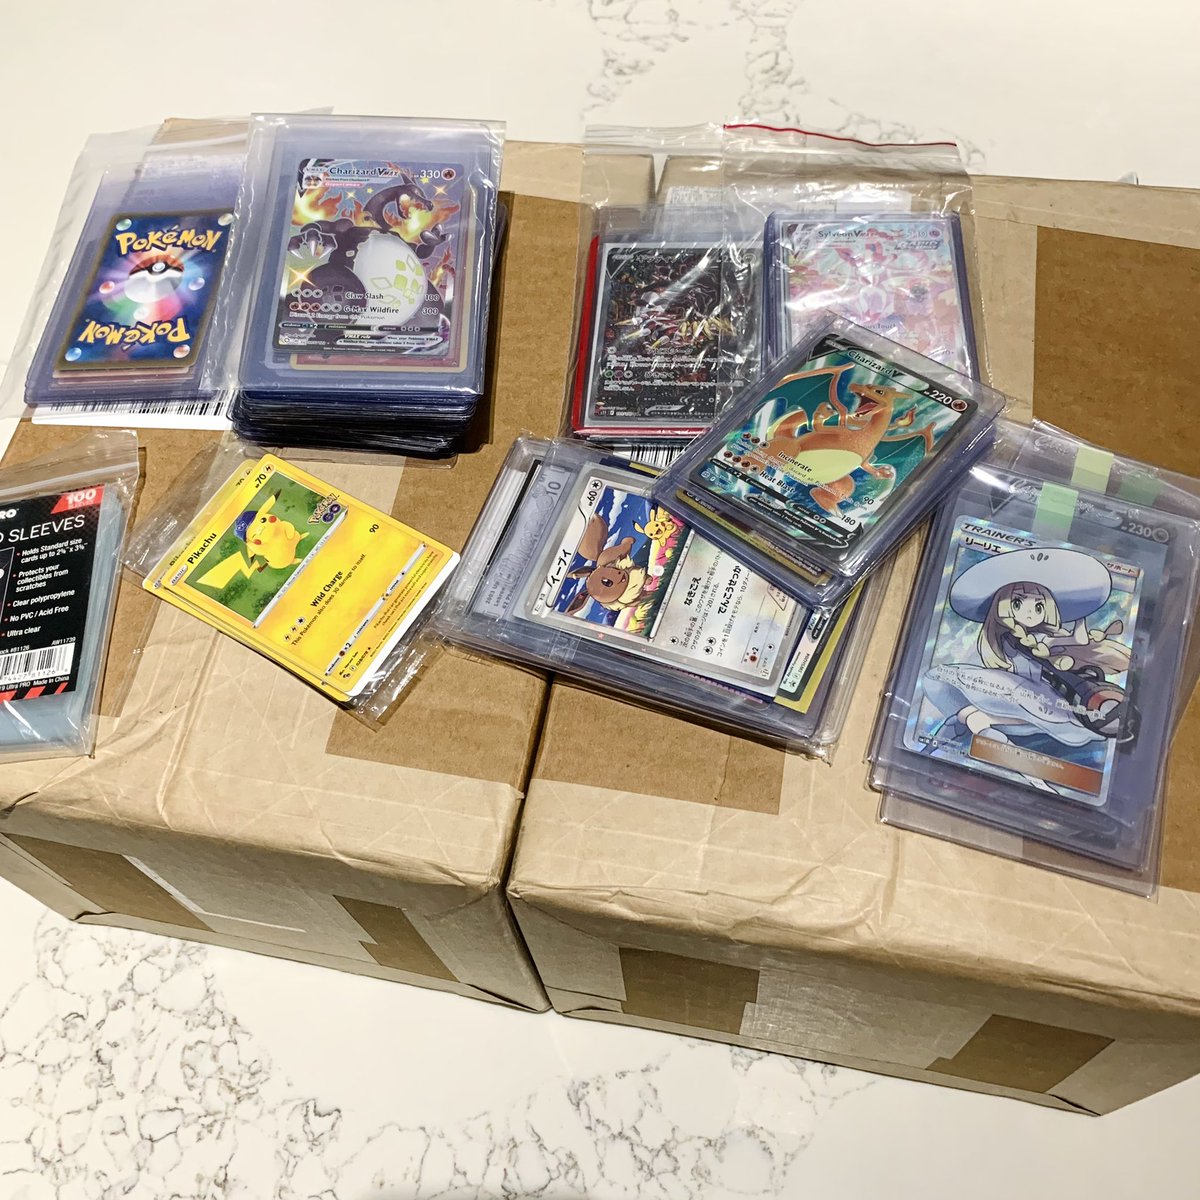 Friday night card sorting. Another epic submission to PSA. Also FedEx just pop by with 2 huge boxes of slab returns. The hobby is very much alive.
#Pokemon #Charizard #Pikachu 